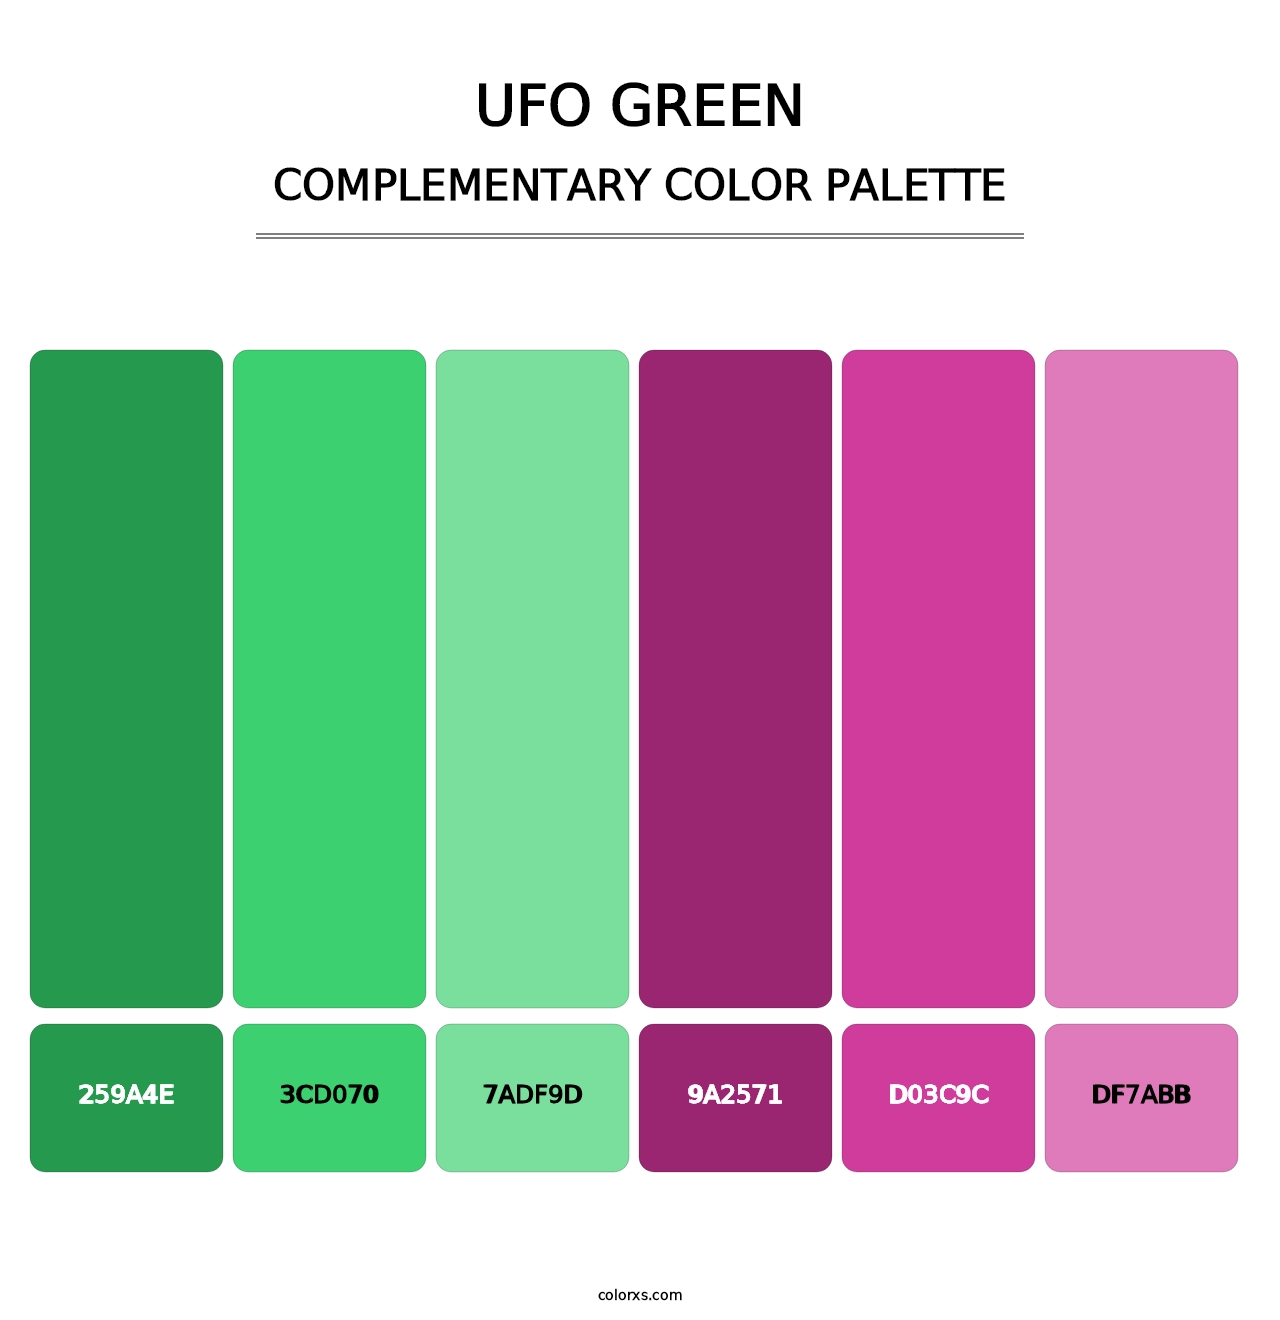 UFO Green - Complementary Color Palette